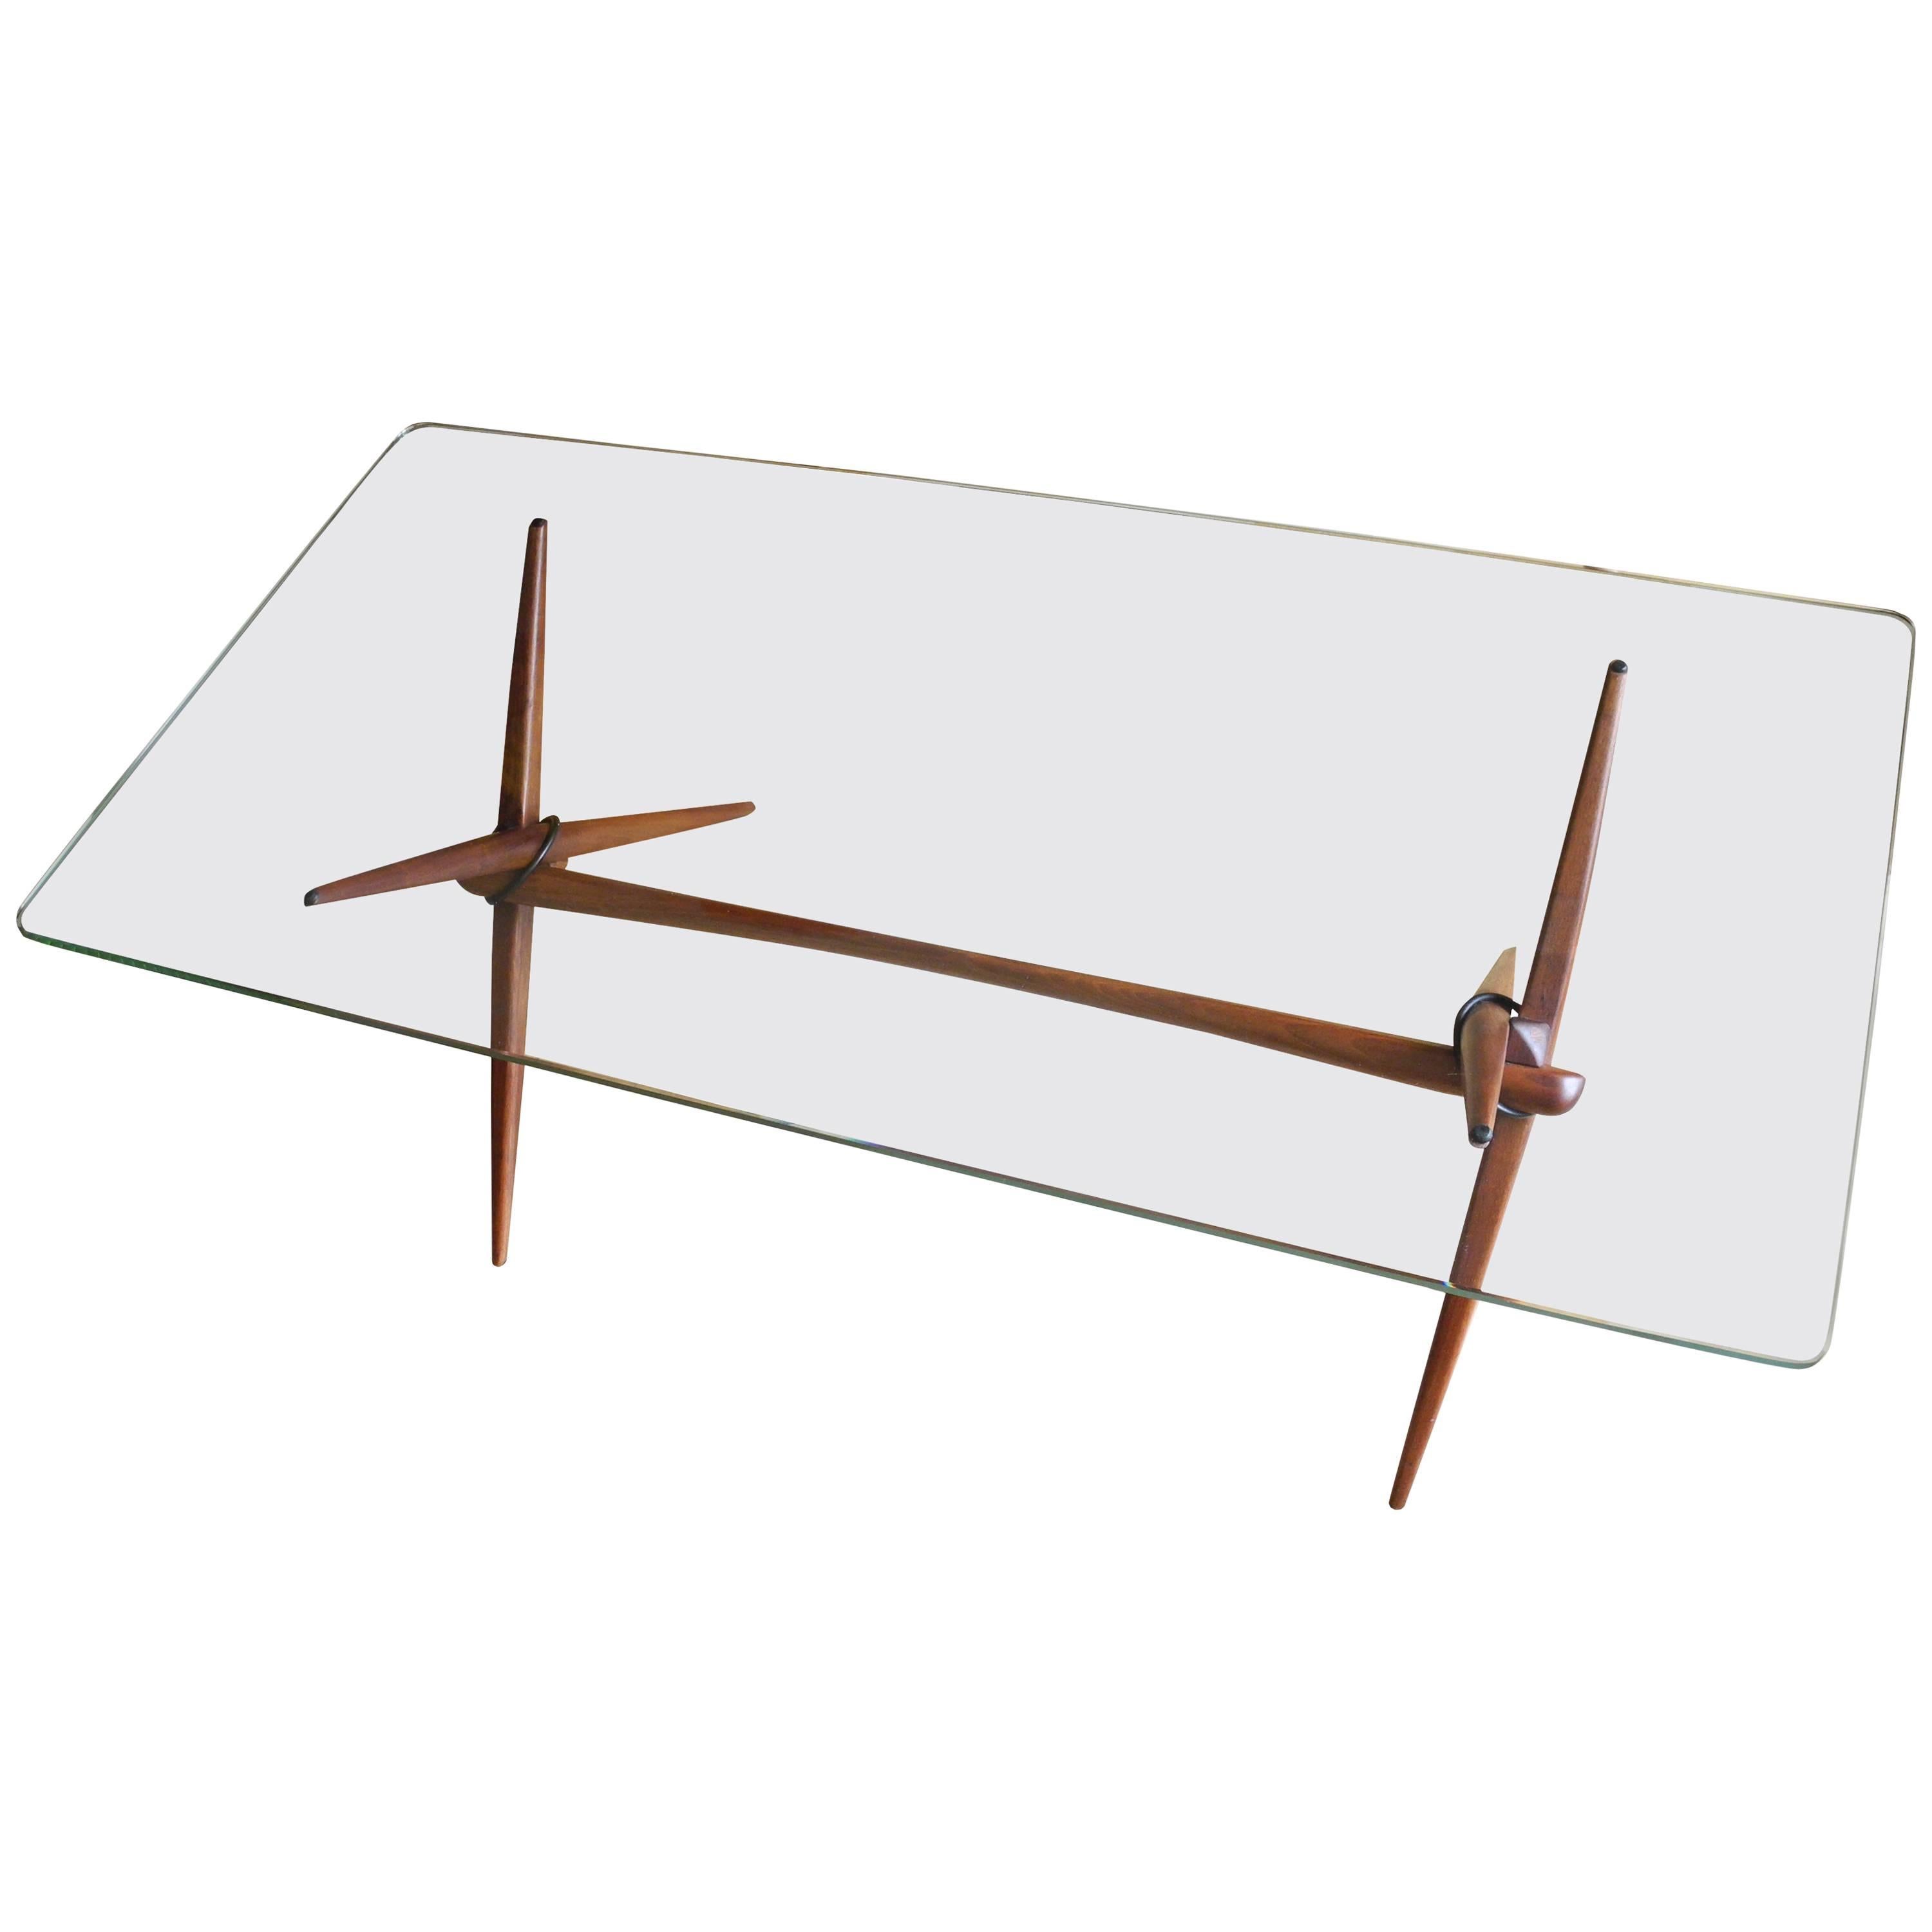 Modern Sculptural Solid Walnut and Glass Coffee Table by Guy Barker